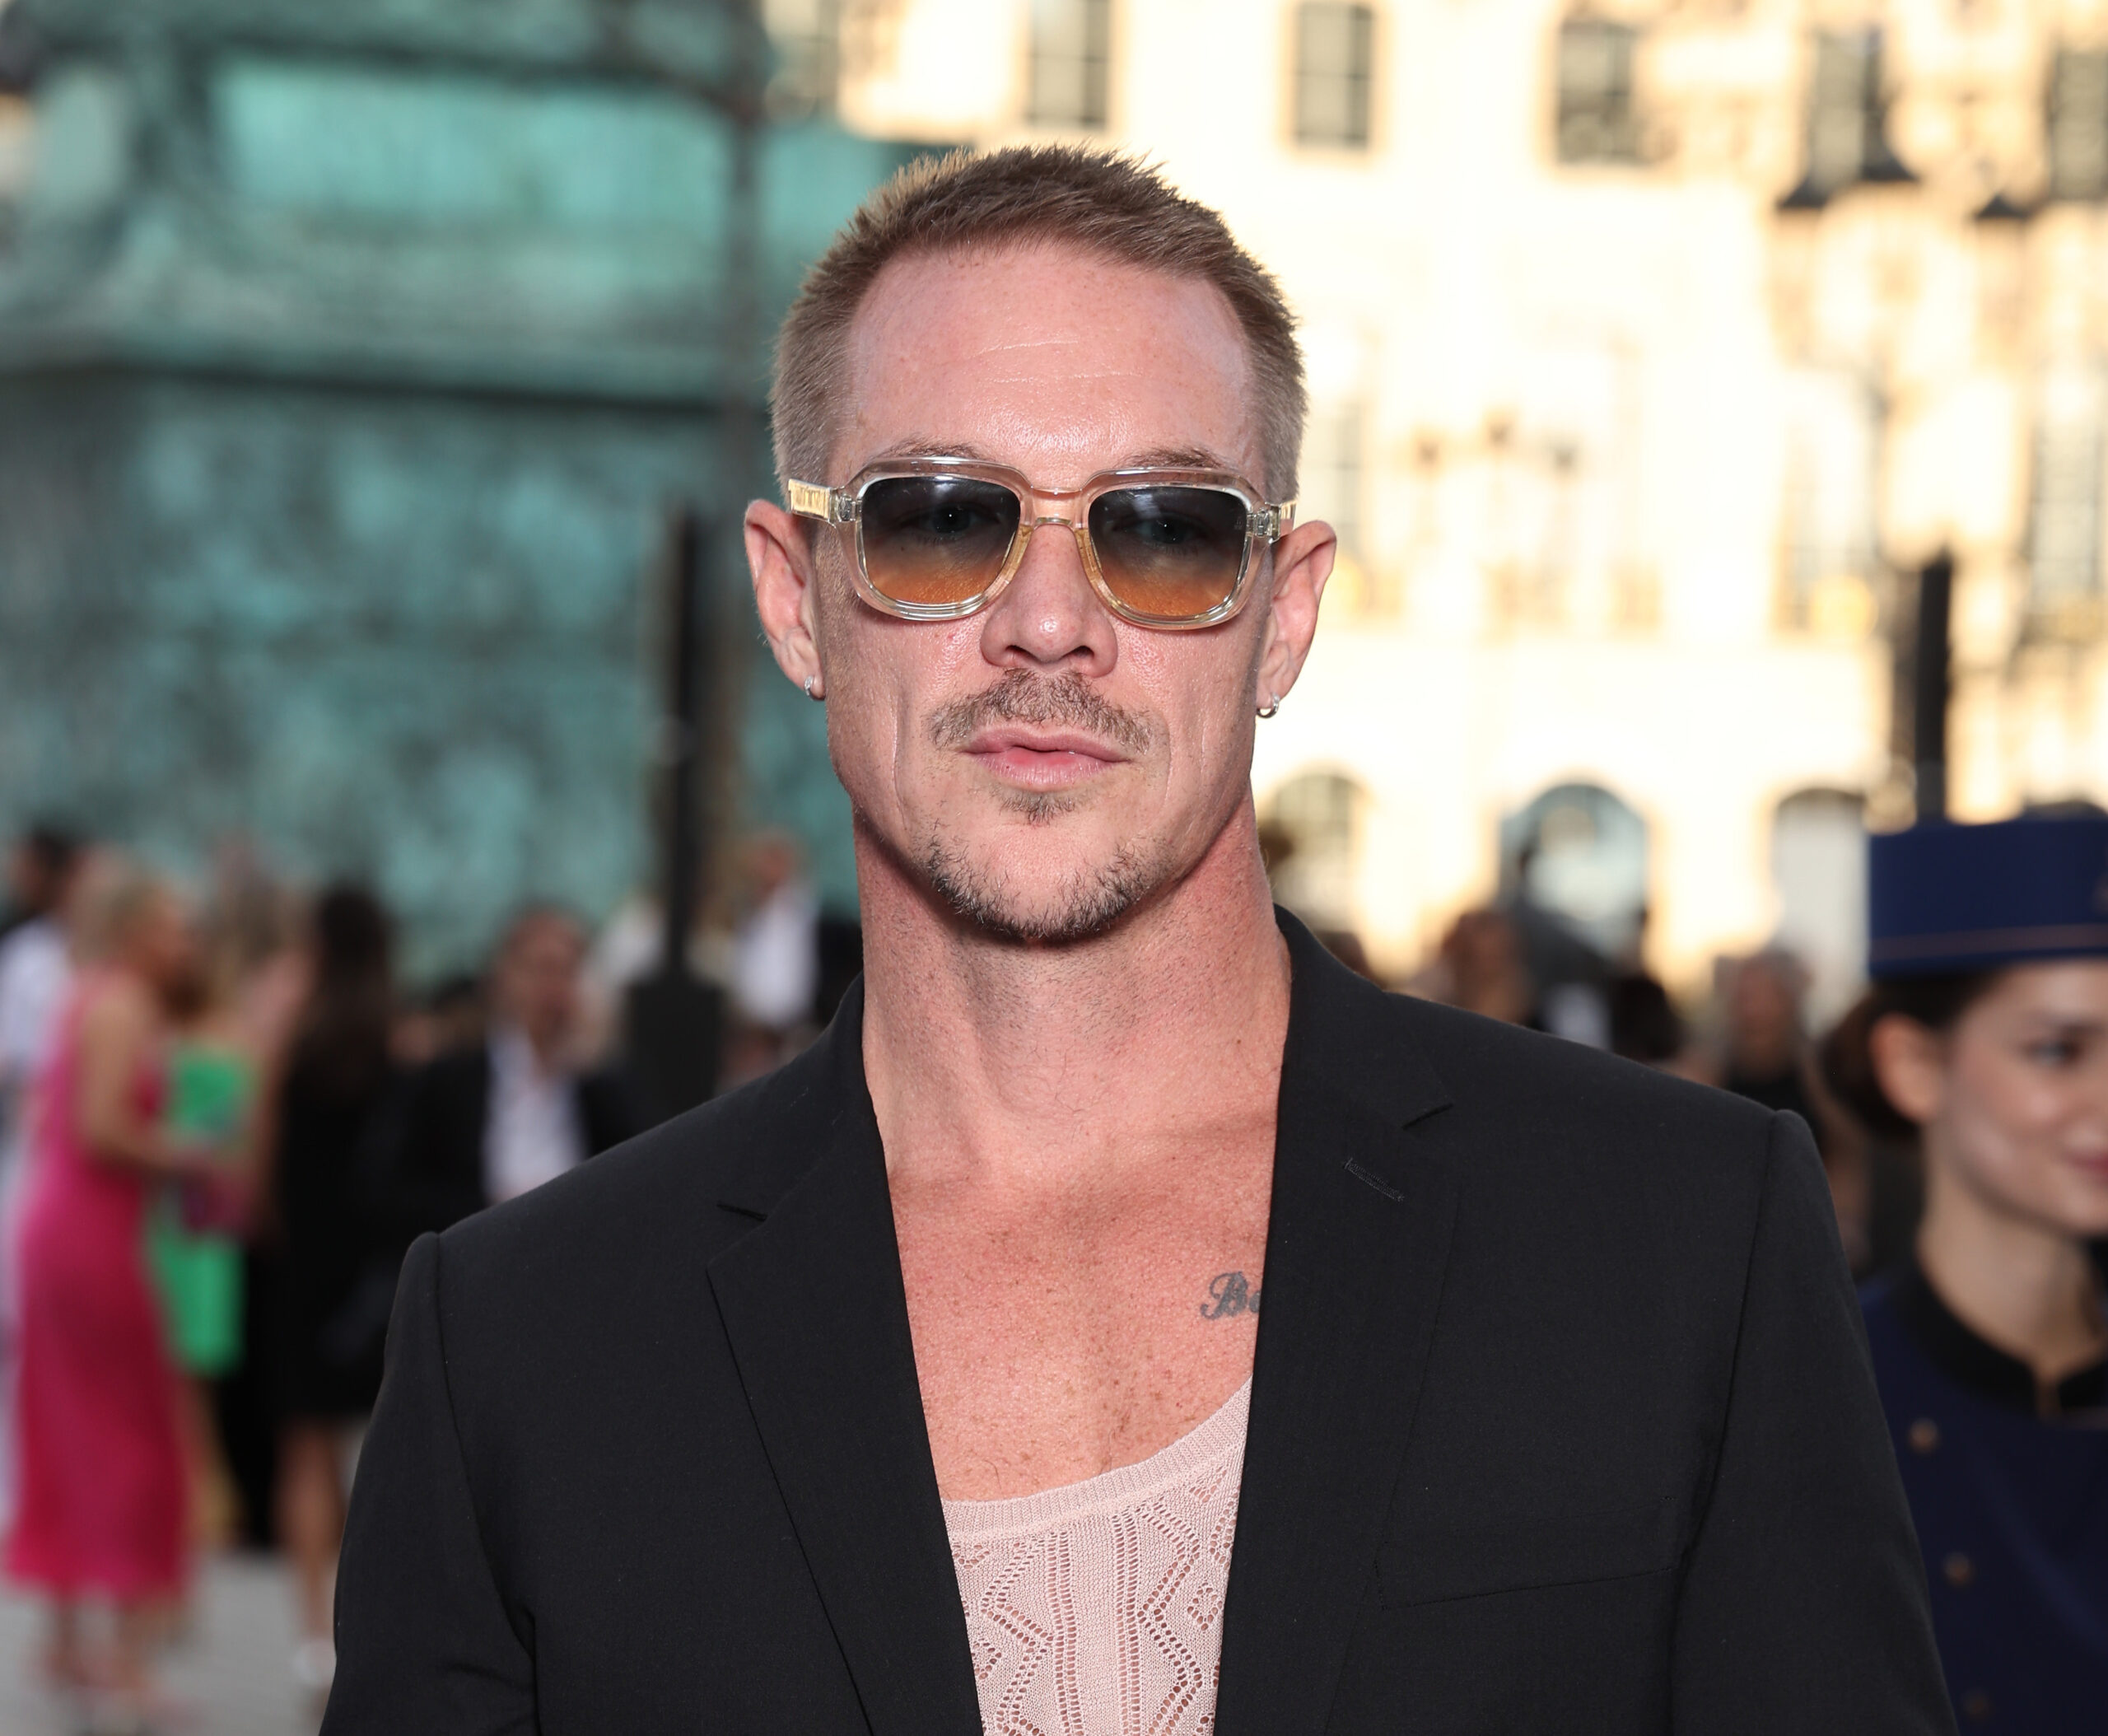 Diplo Accused Of Distributing Revenge Porn By Second Woman